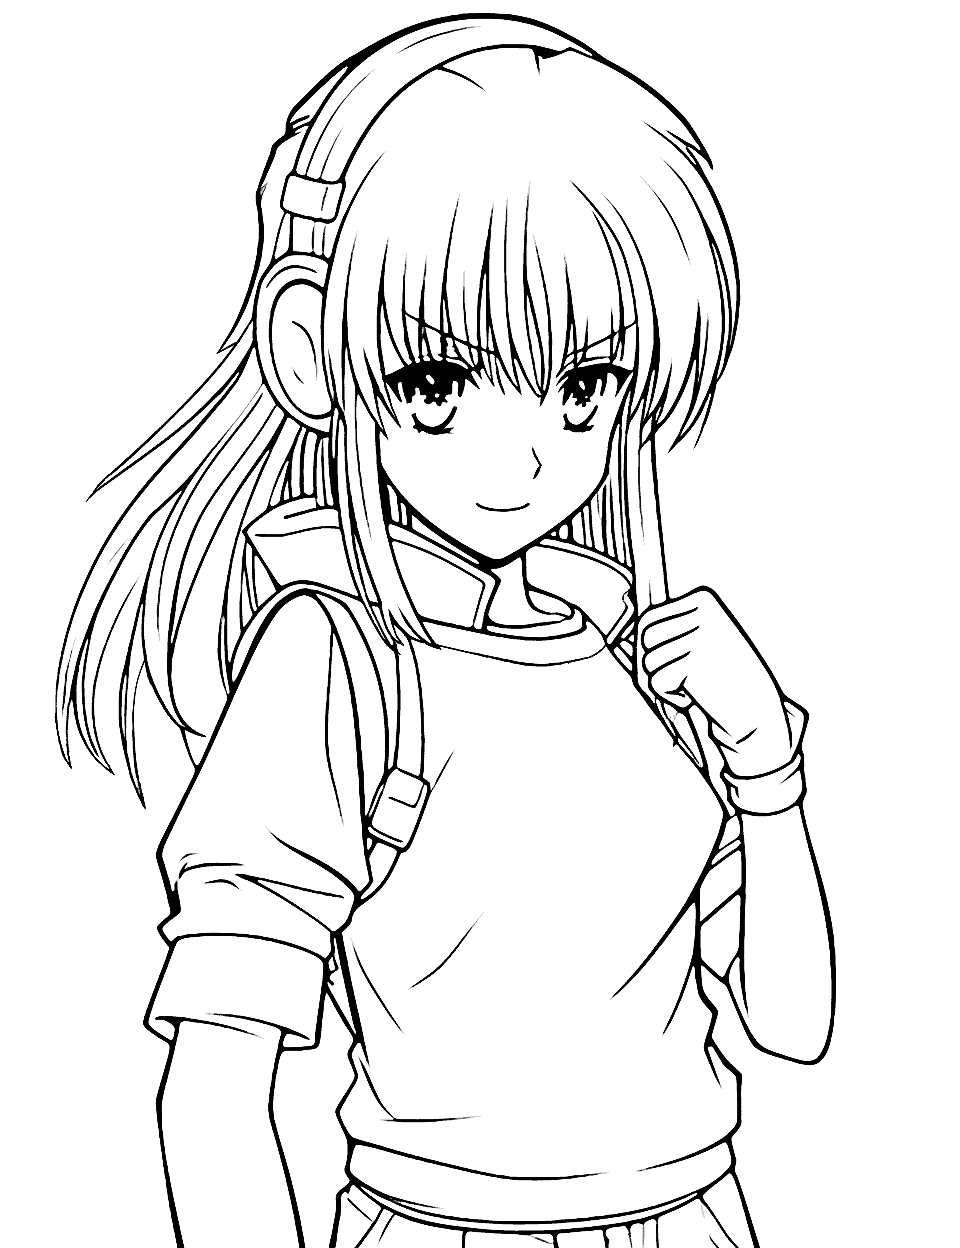 Anime Line Art Coloring Page - A simple anime line art for kids who love to color within the lines.